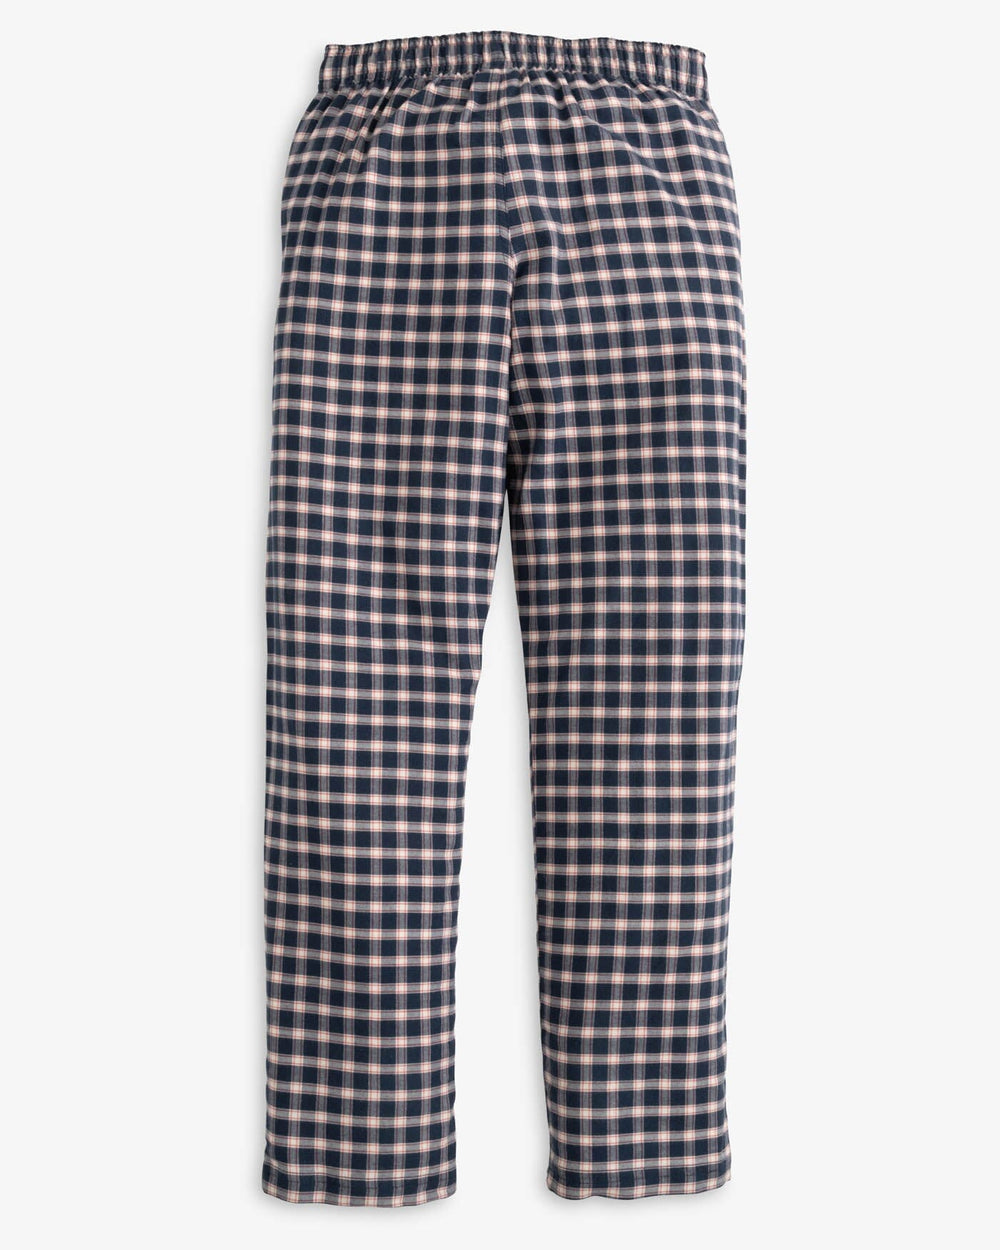 The back view of the Southern Tide Youth Silverleaf Plaid Lounge Pant by Southern Tide - Dress Blue